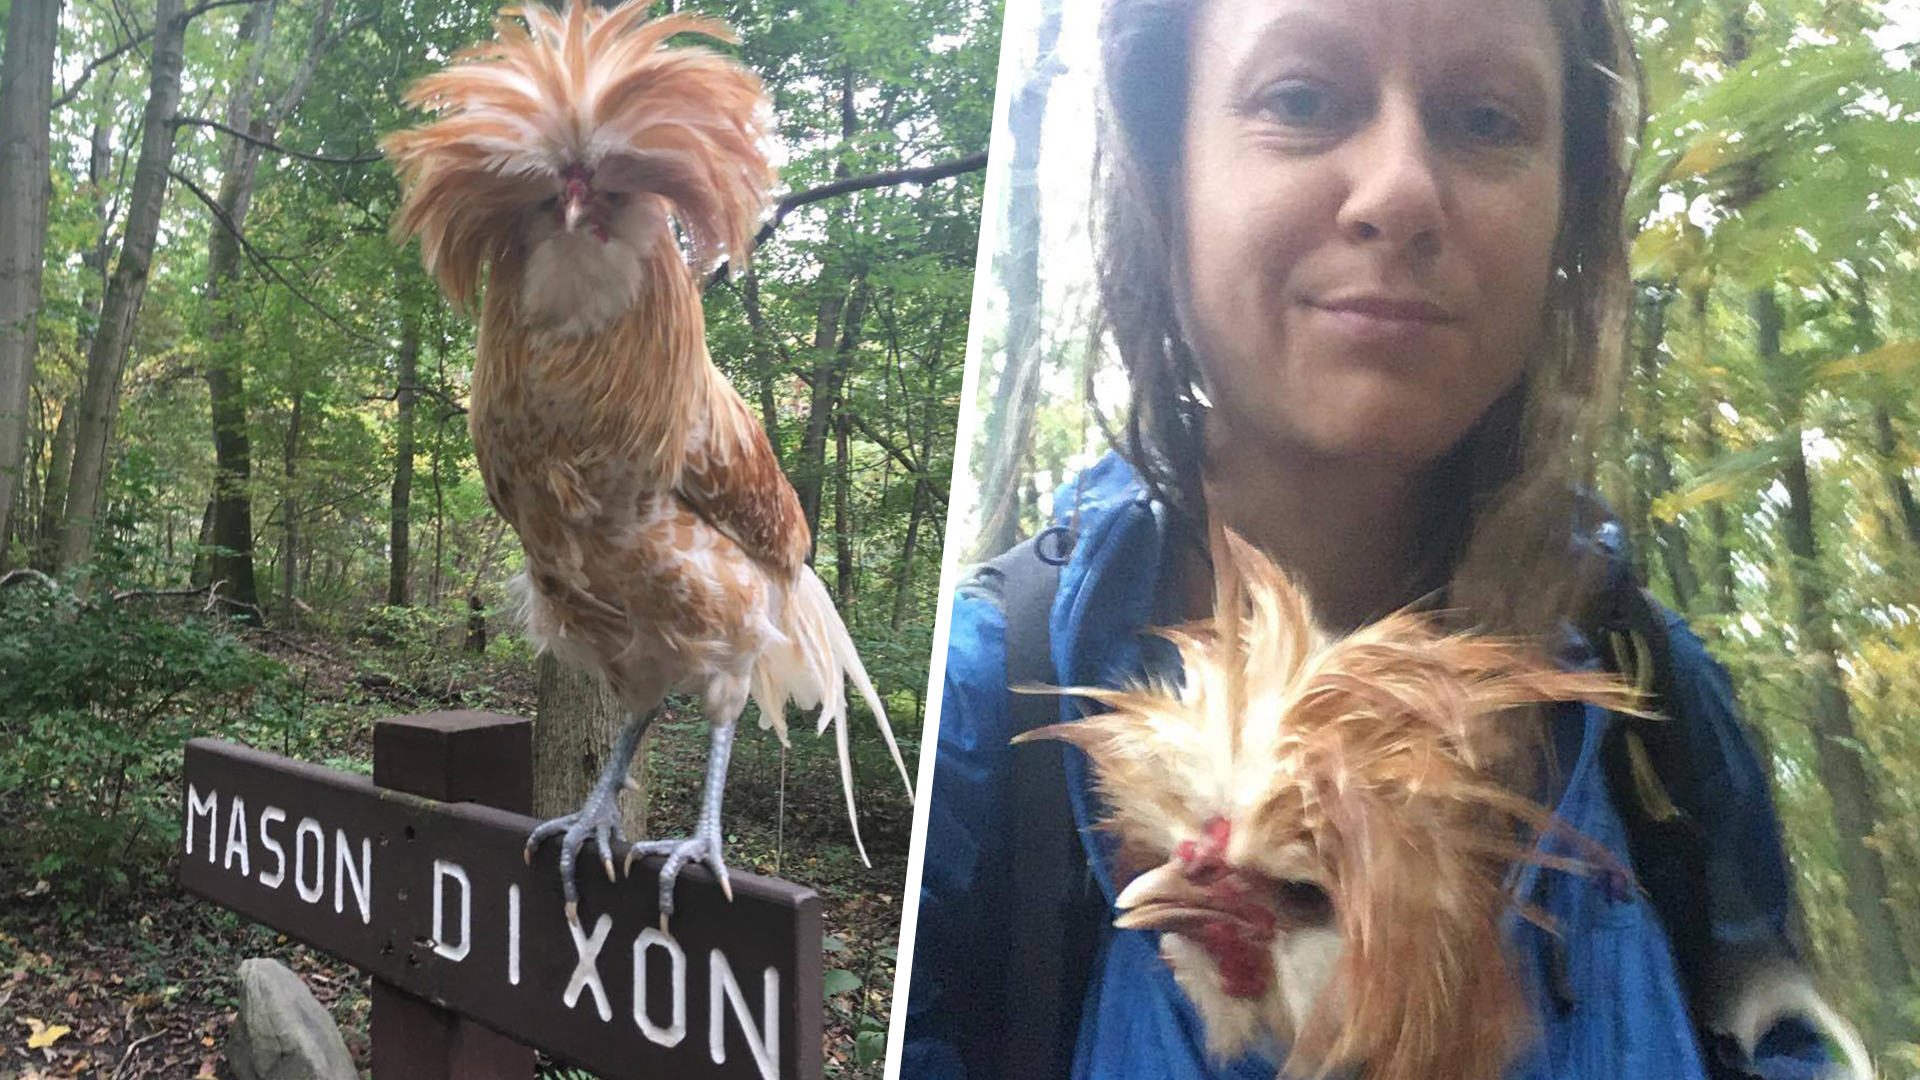 hiker-finds-lost-rooster-in-trail-and-takes-it-with-her